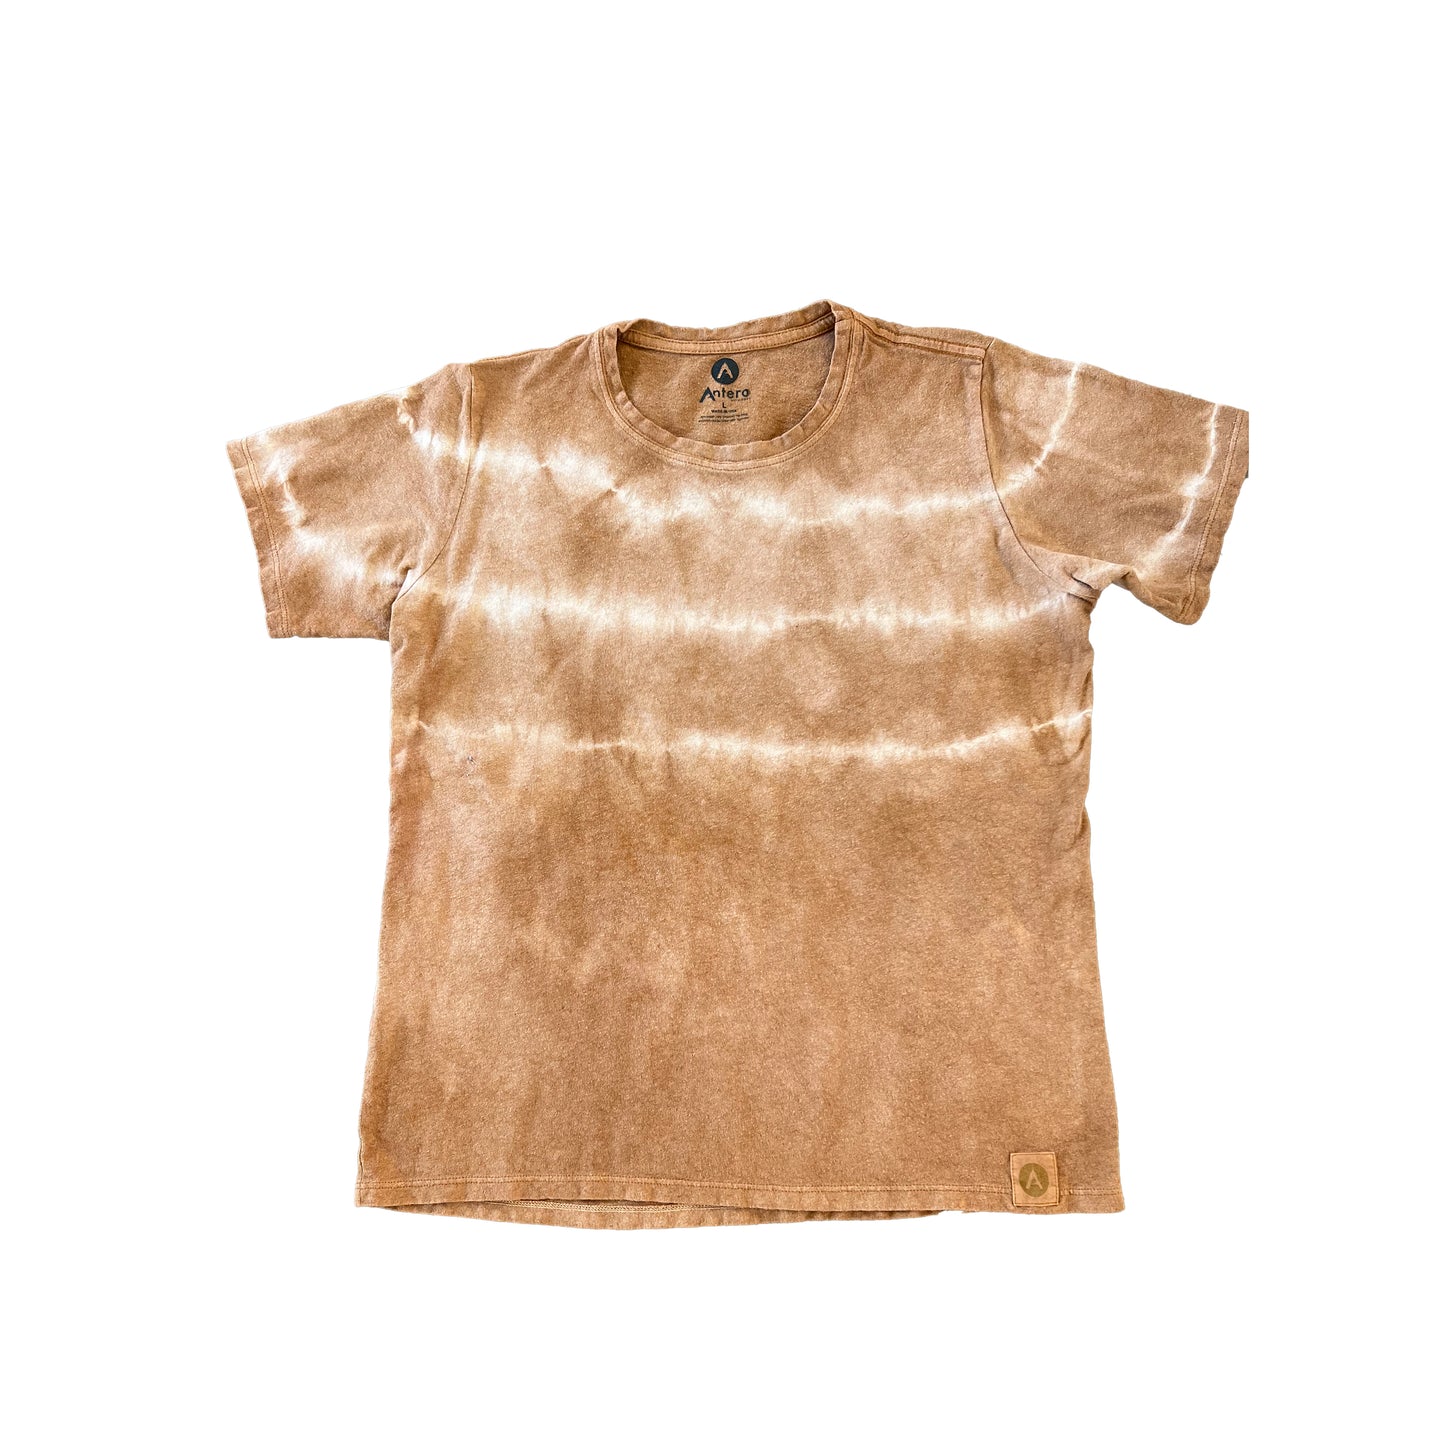 Woman's Naturally Dyed Tee